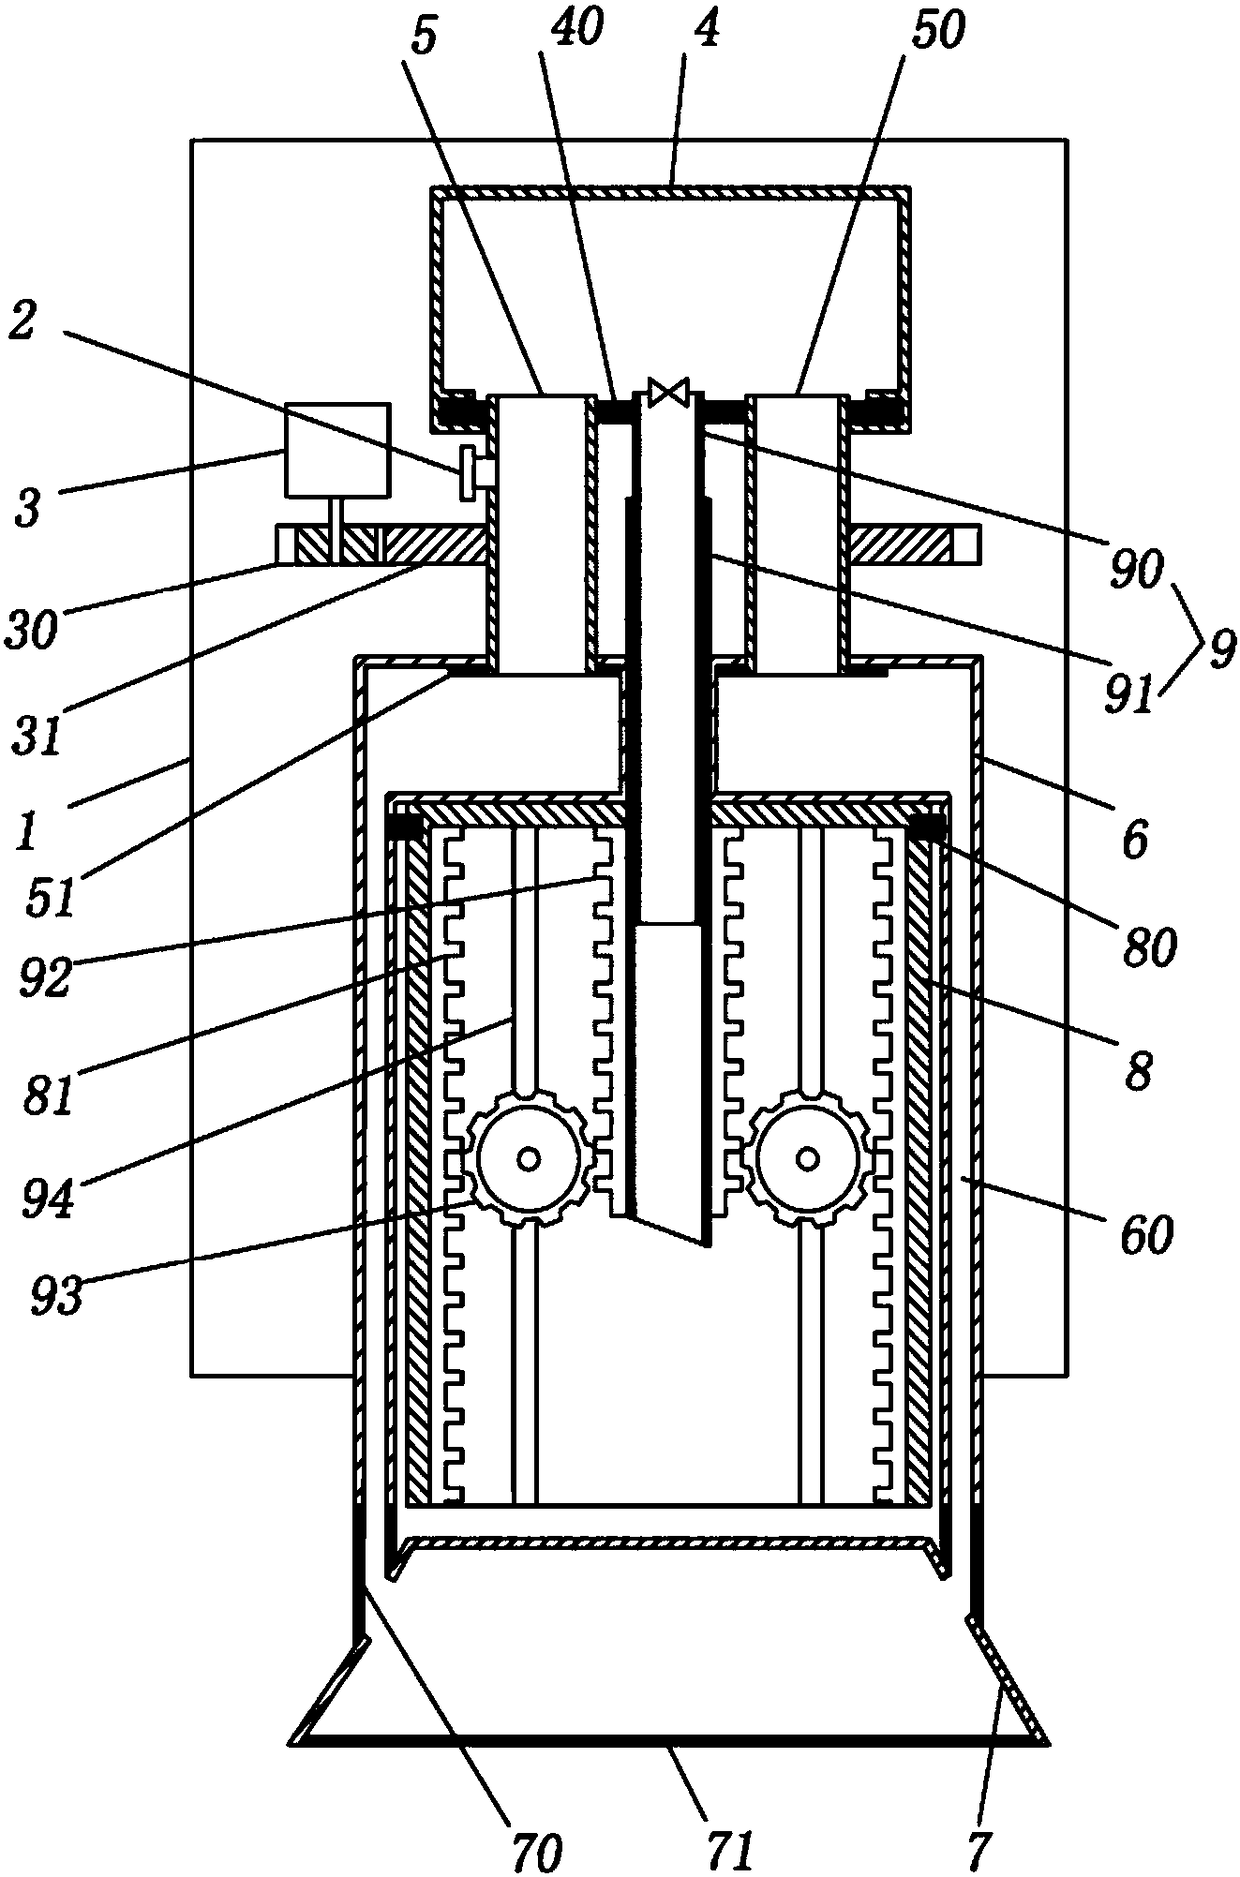 Equipment for pouring acid for horizontal batteries